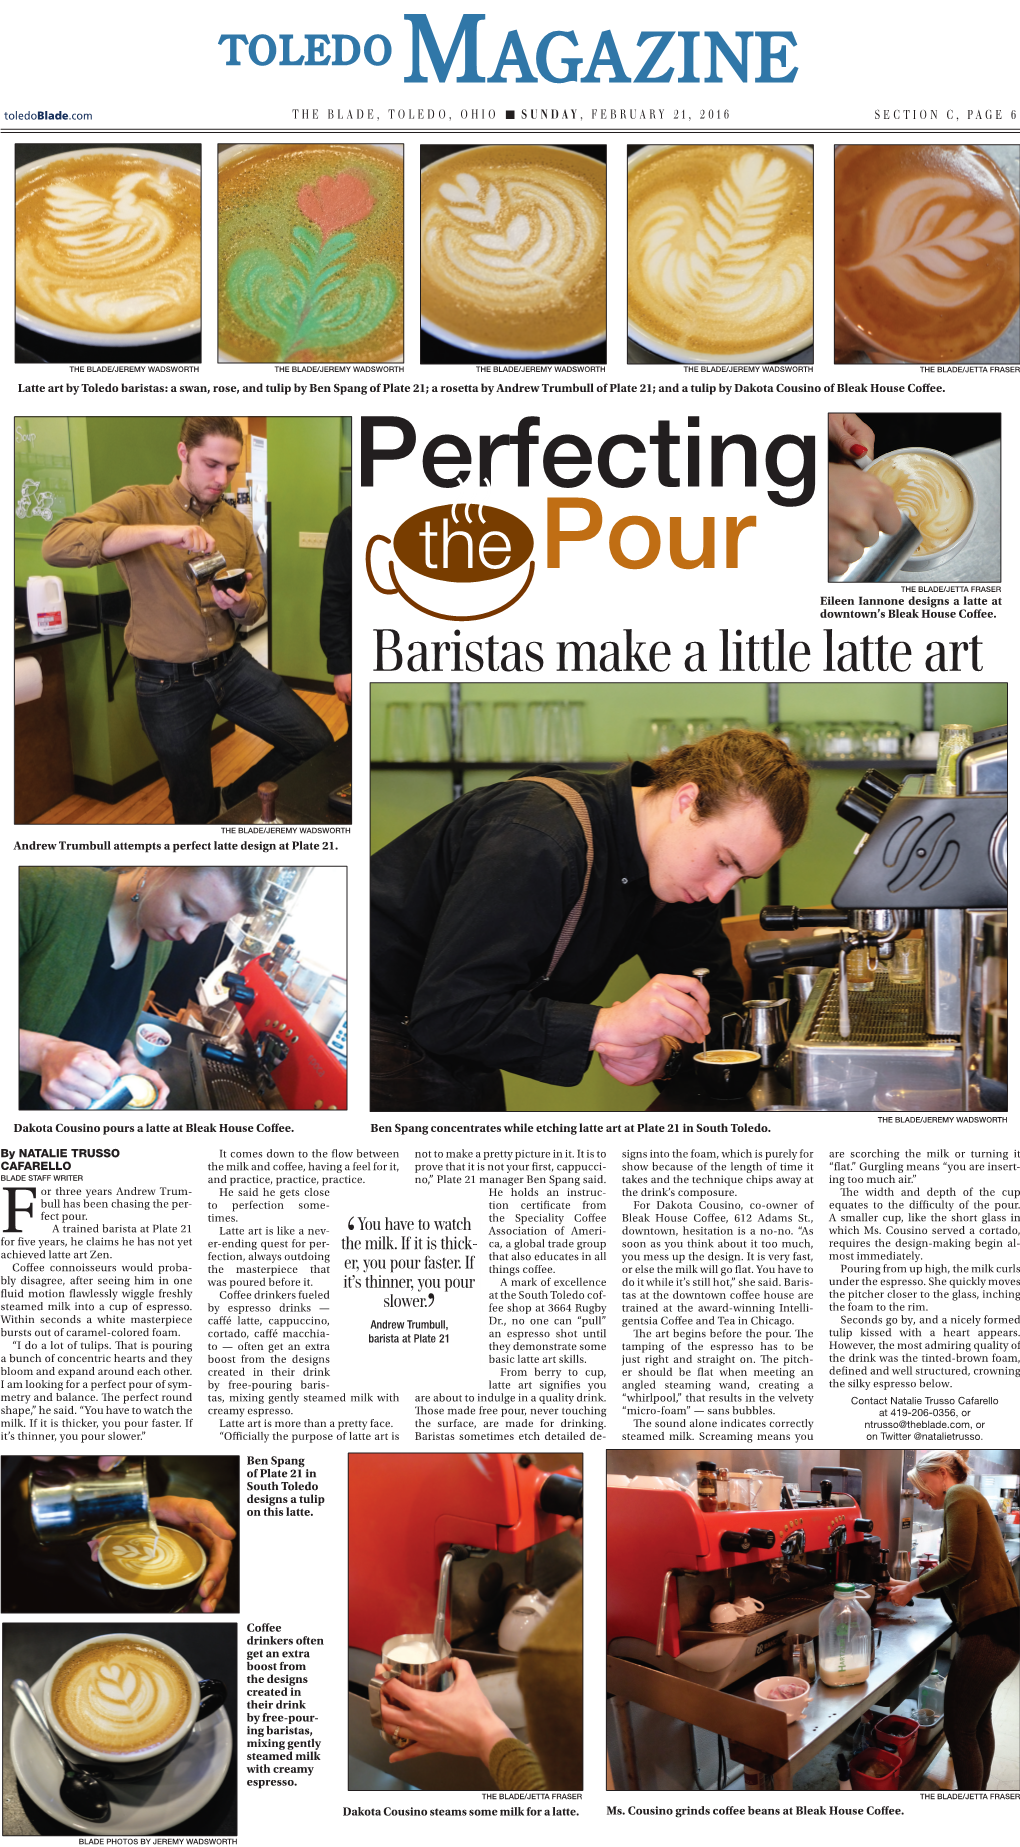 The Pour the BLADE/JETTA FRASER Eileen Iannone Designs a Latte at Downtown’S Bleak House Coffee